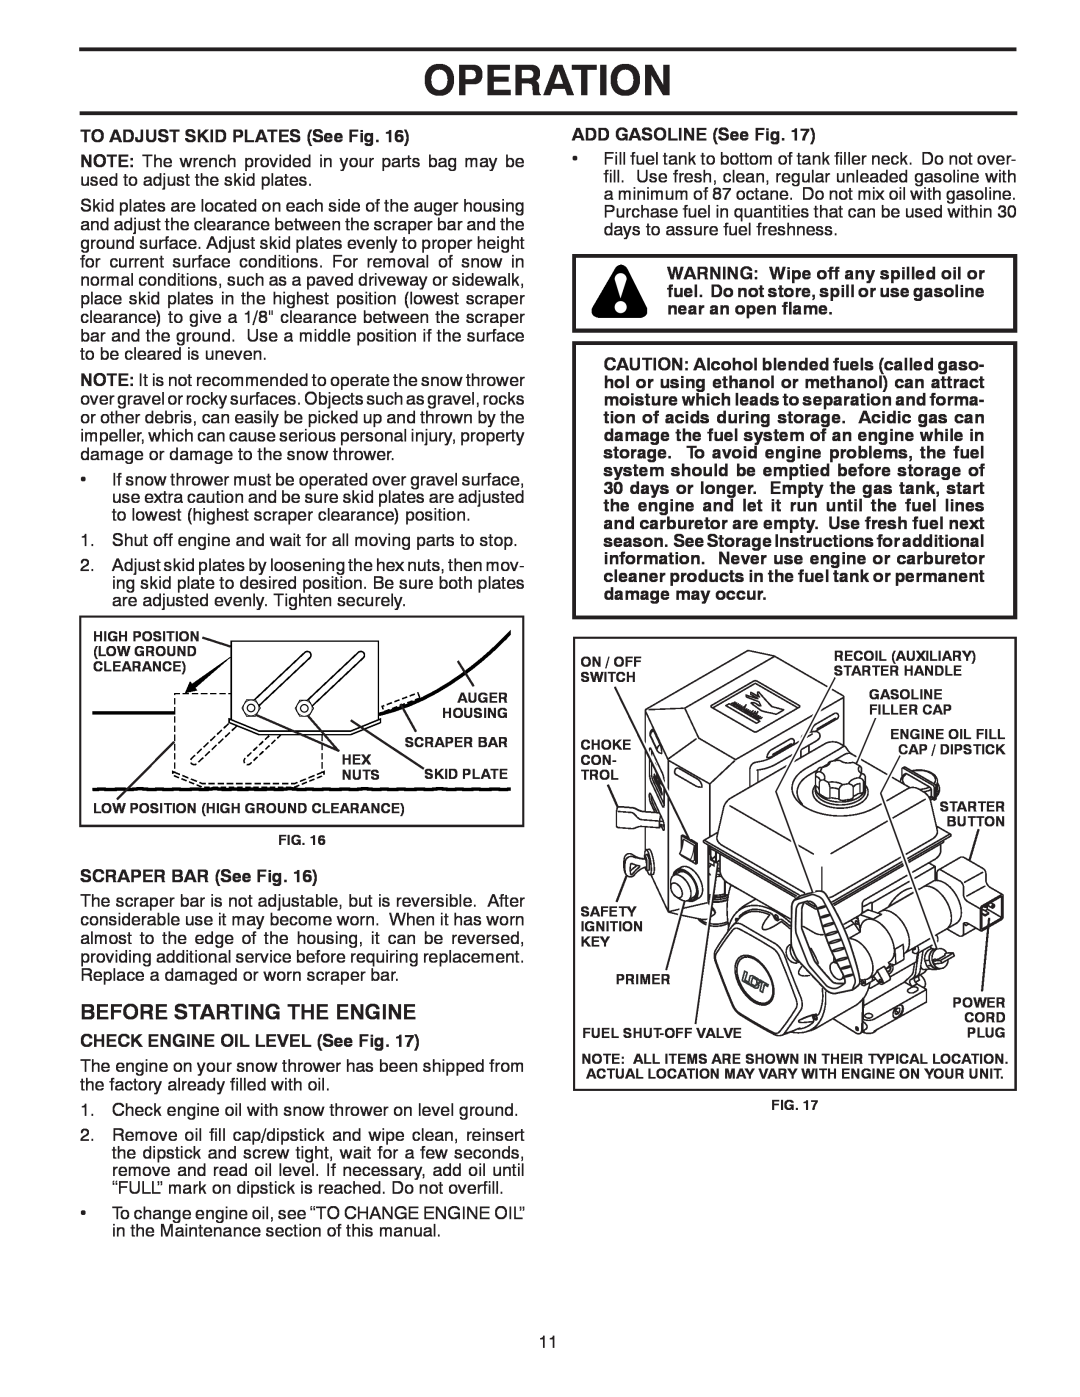 McCulloch MC12527ES owner manual Before Starting The Engine, Operation, TO ADJUST SKID PLATES See Fig, SCRAPER BAR See Fig 